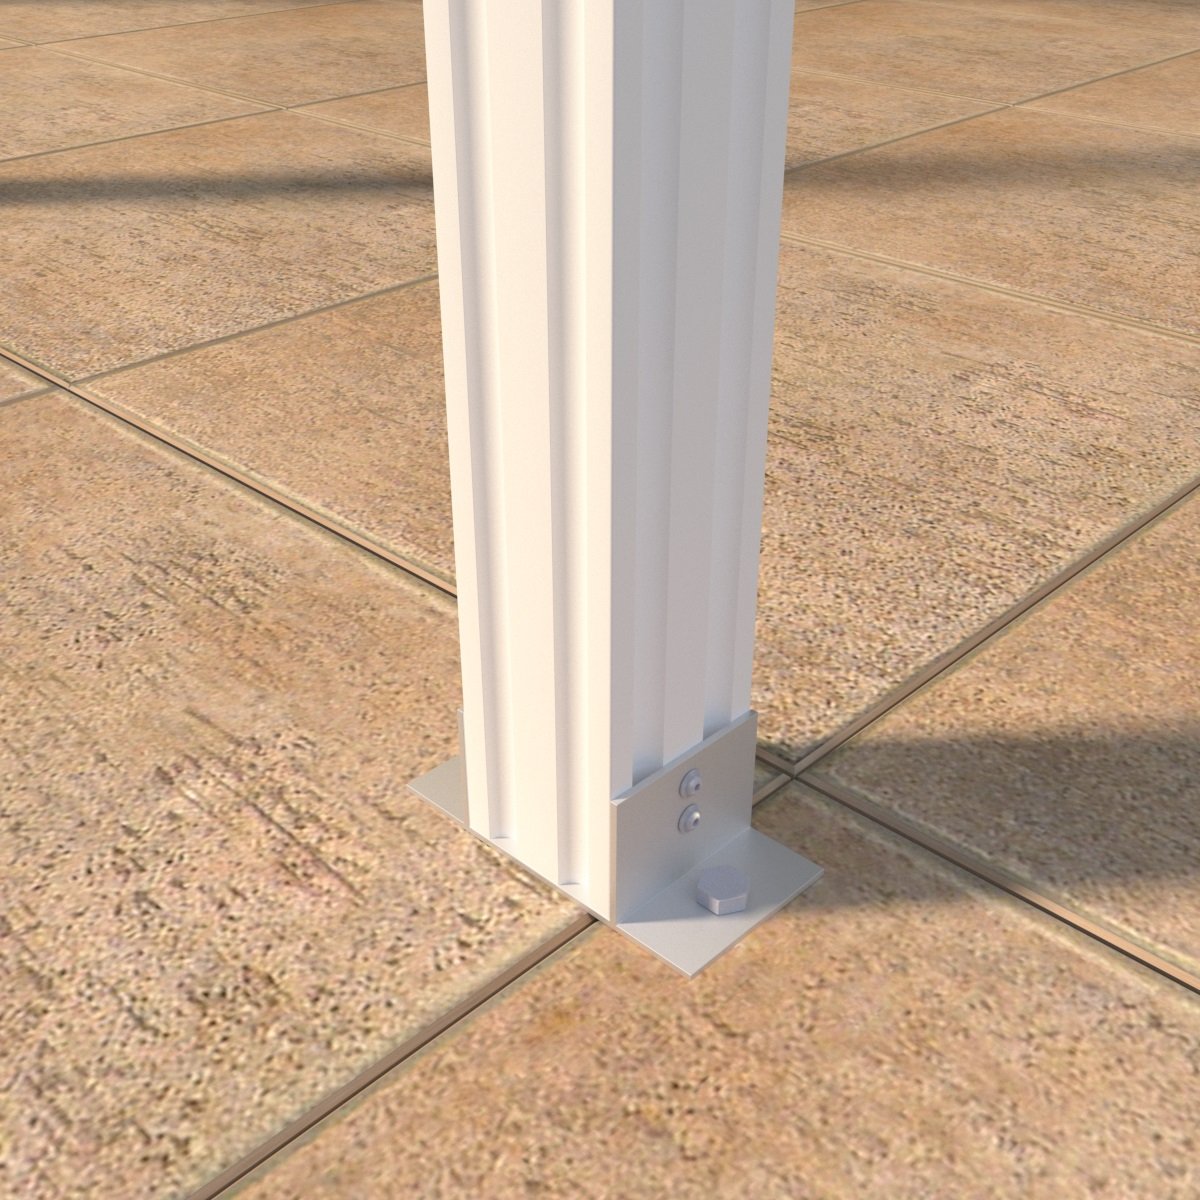 09 ft. Deep x 16 ft. Wide White Attached Aluminum Patio Cover -3 Posts - (10lb Low Snow Area)